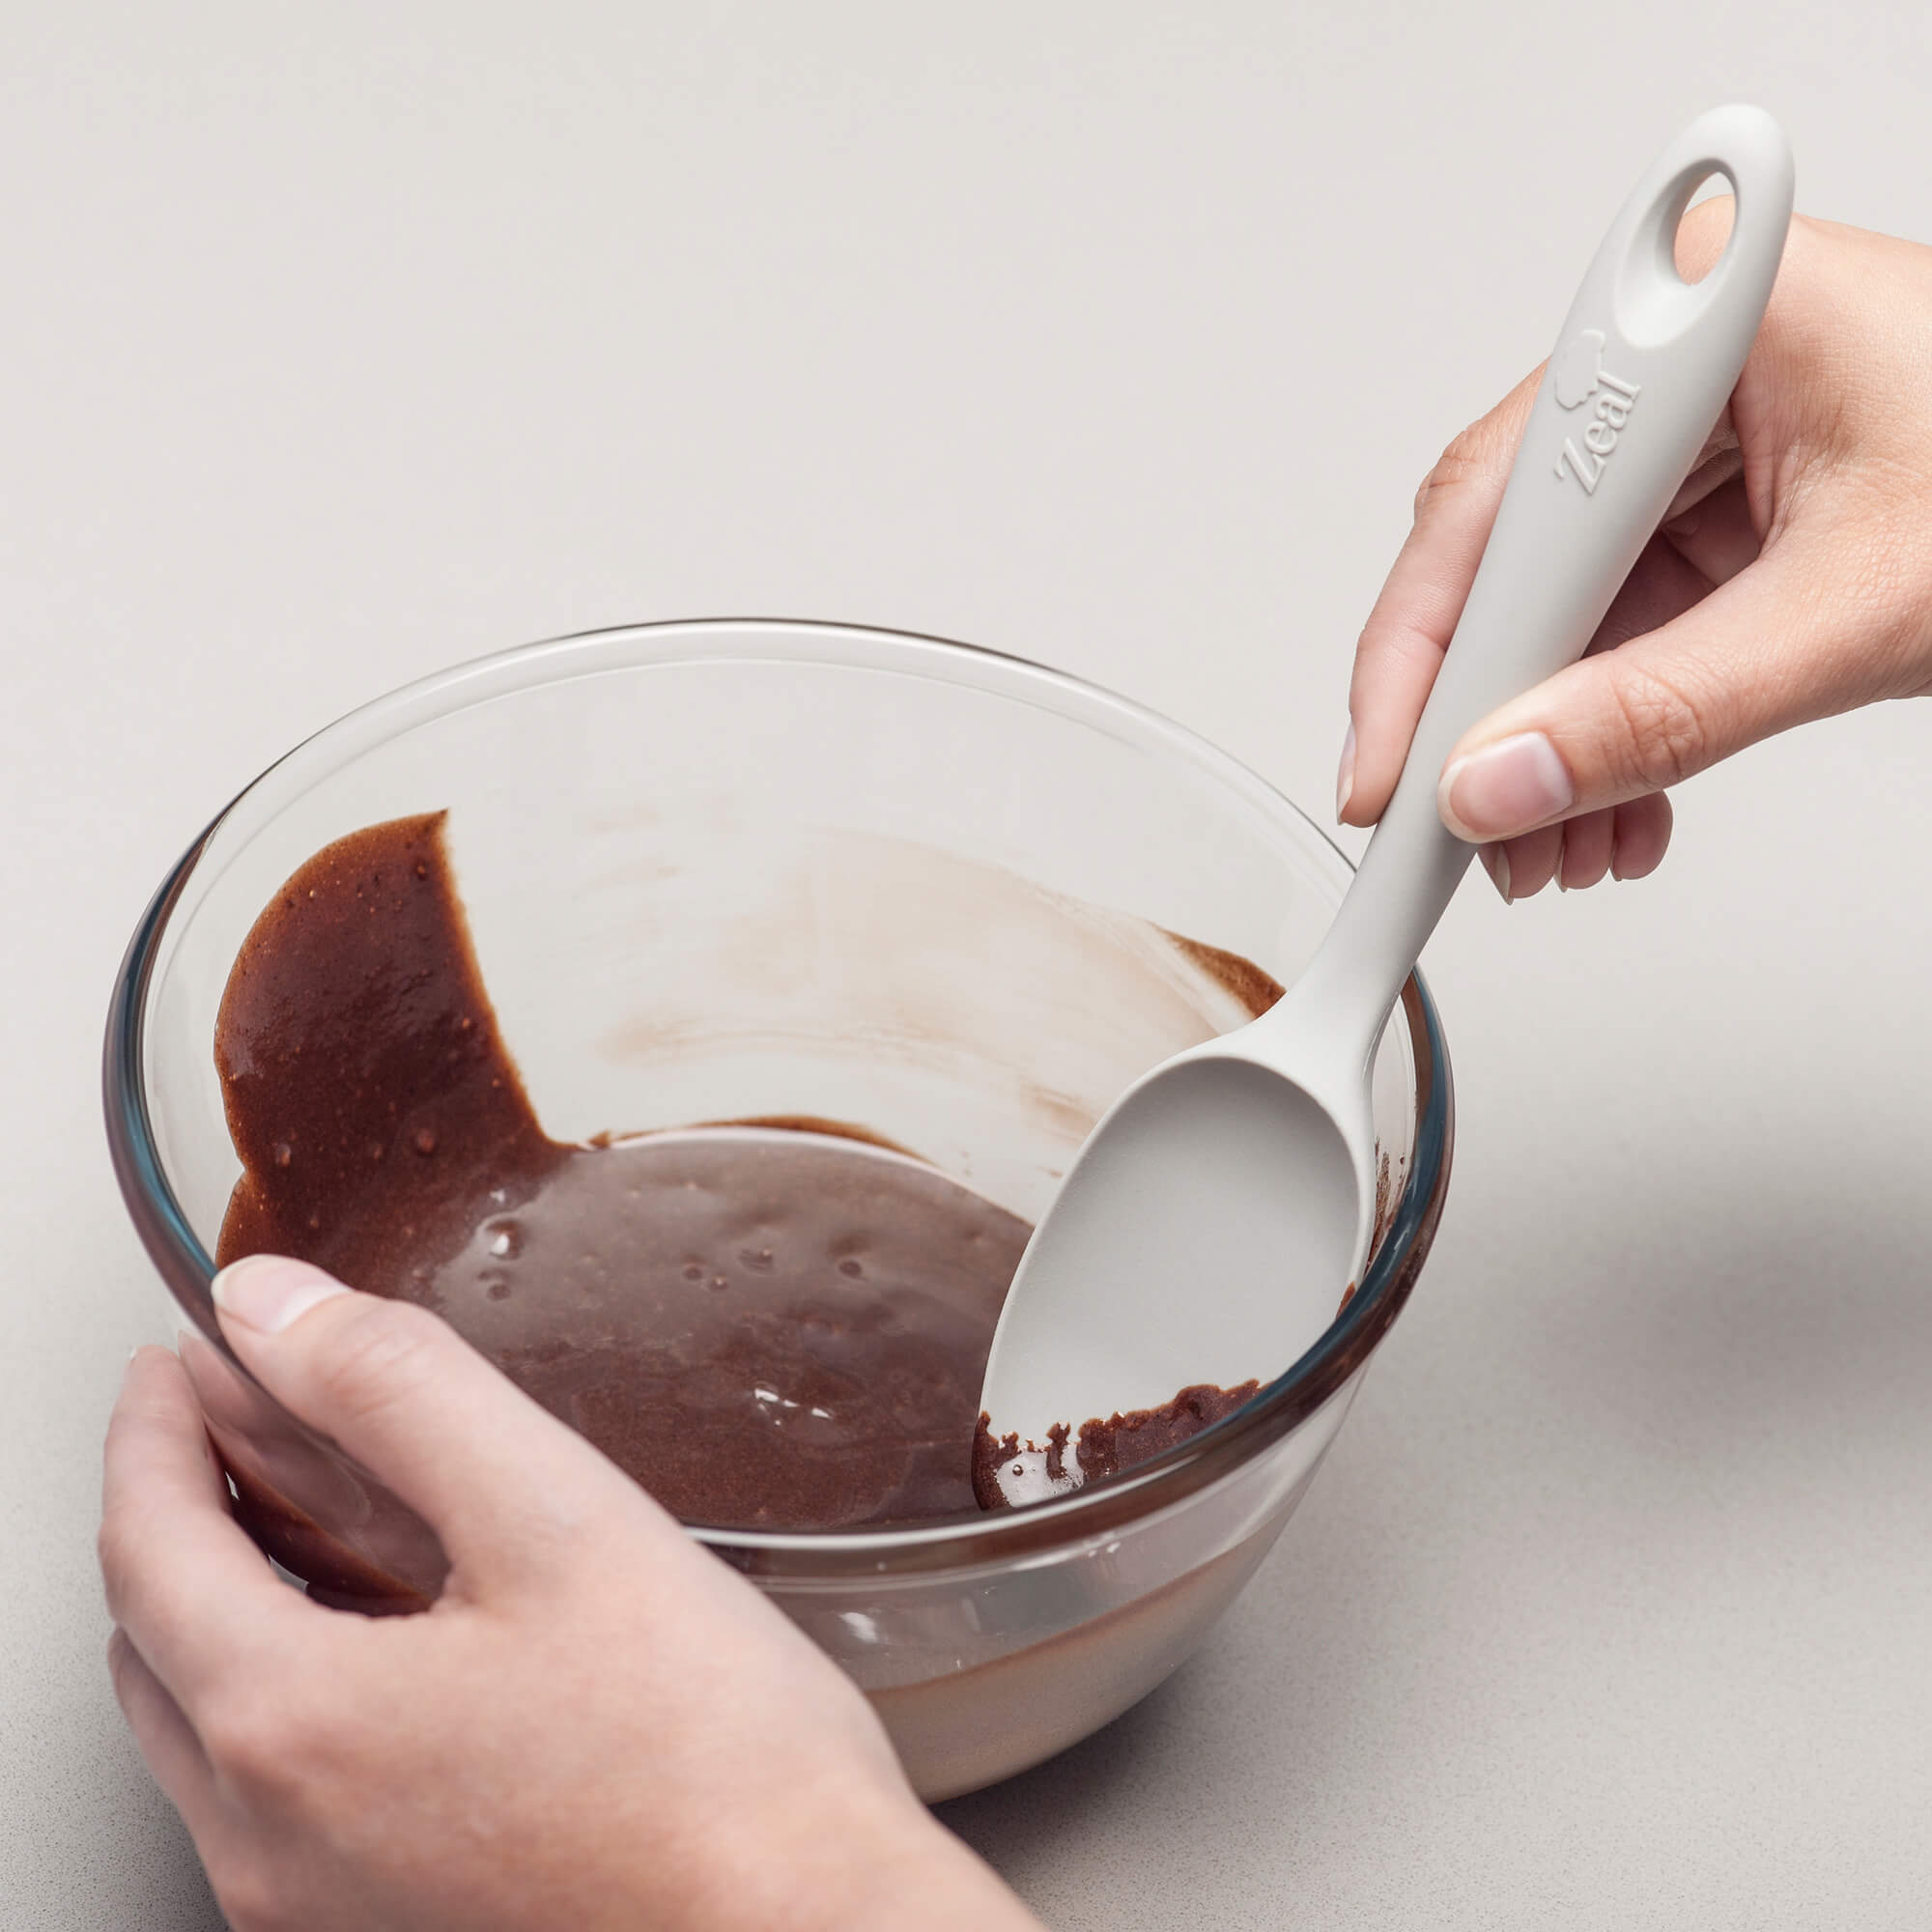 Using a Zeal Silicone Spatula Spoon to scrape a bowl